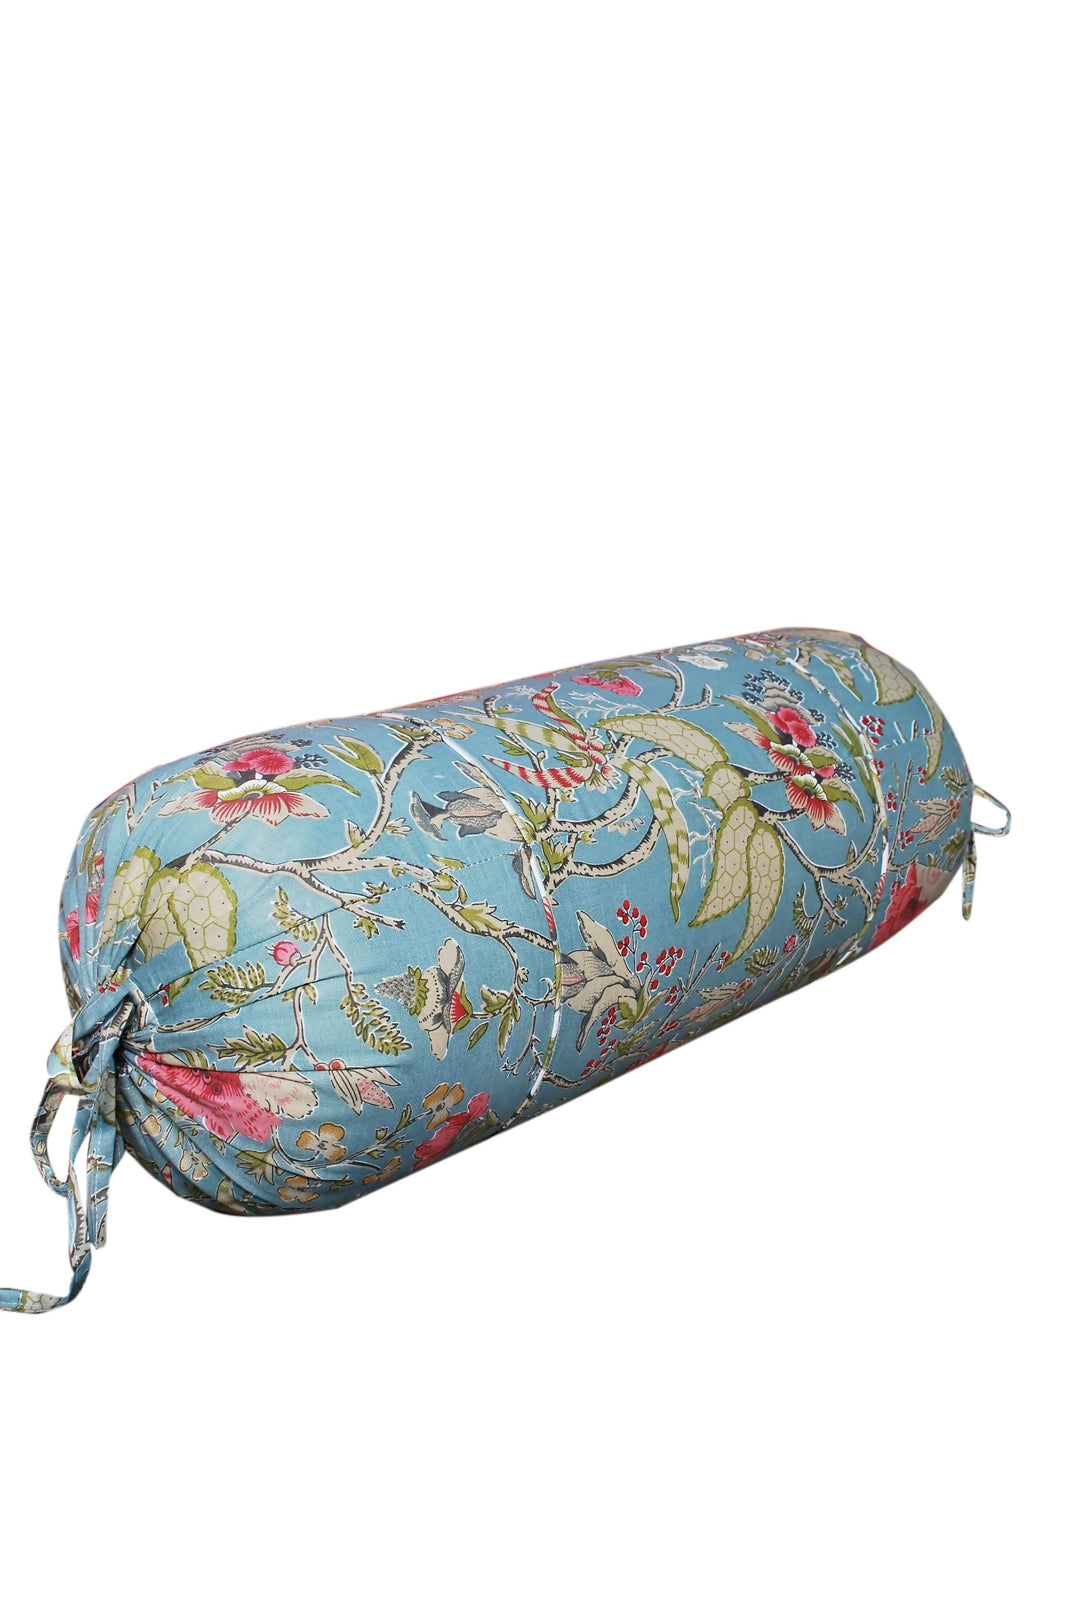 100% Cotton Printed Pipe-In Bolster Covers - Pack of 2 - Trance Home Linen